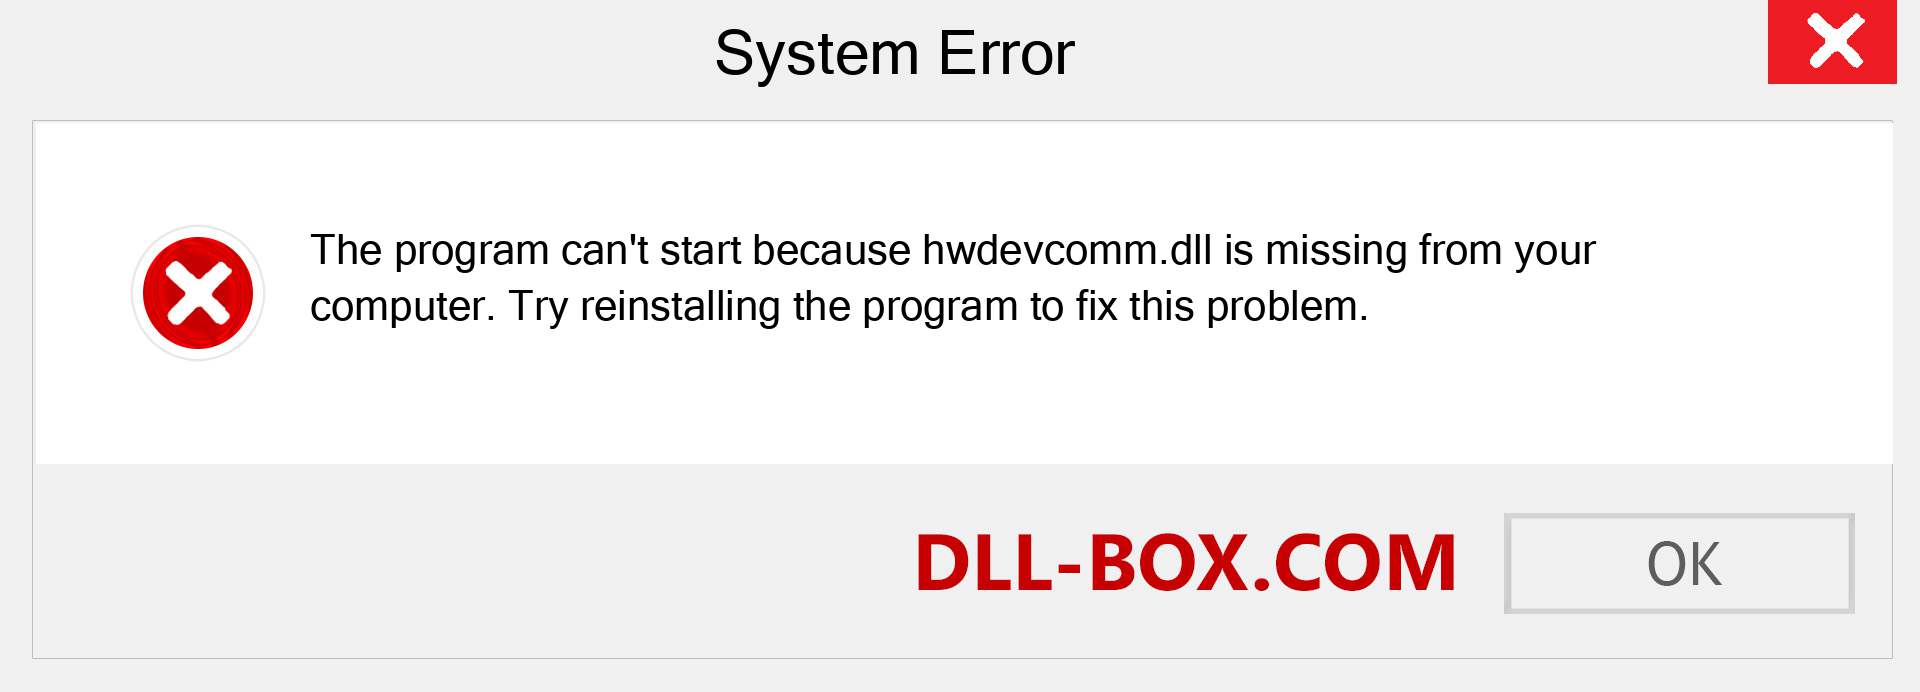  hwdevcomm.dll file is missing?. Download for Windows 7, 8, 10 - Fix  hwdevcomm dll Missing Error on Windows, photos, images